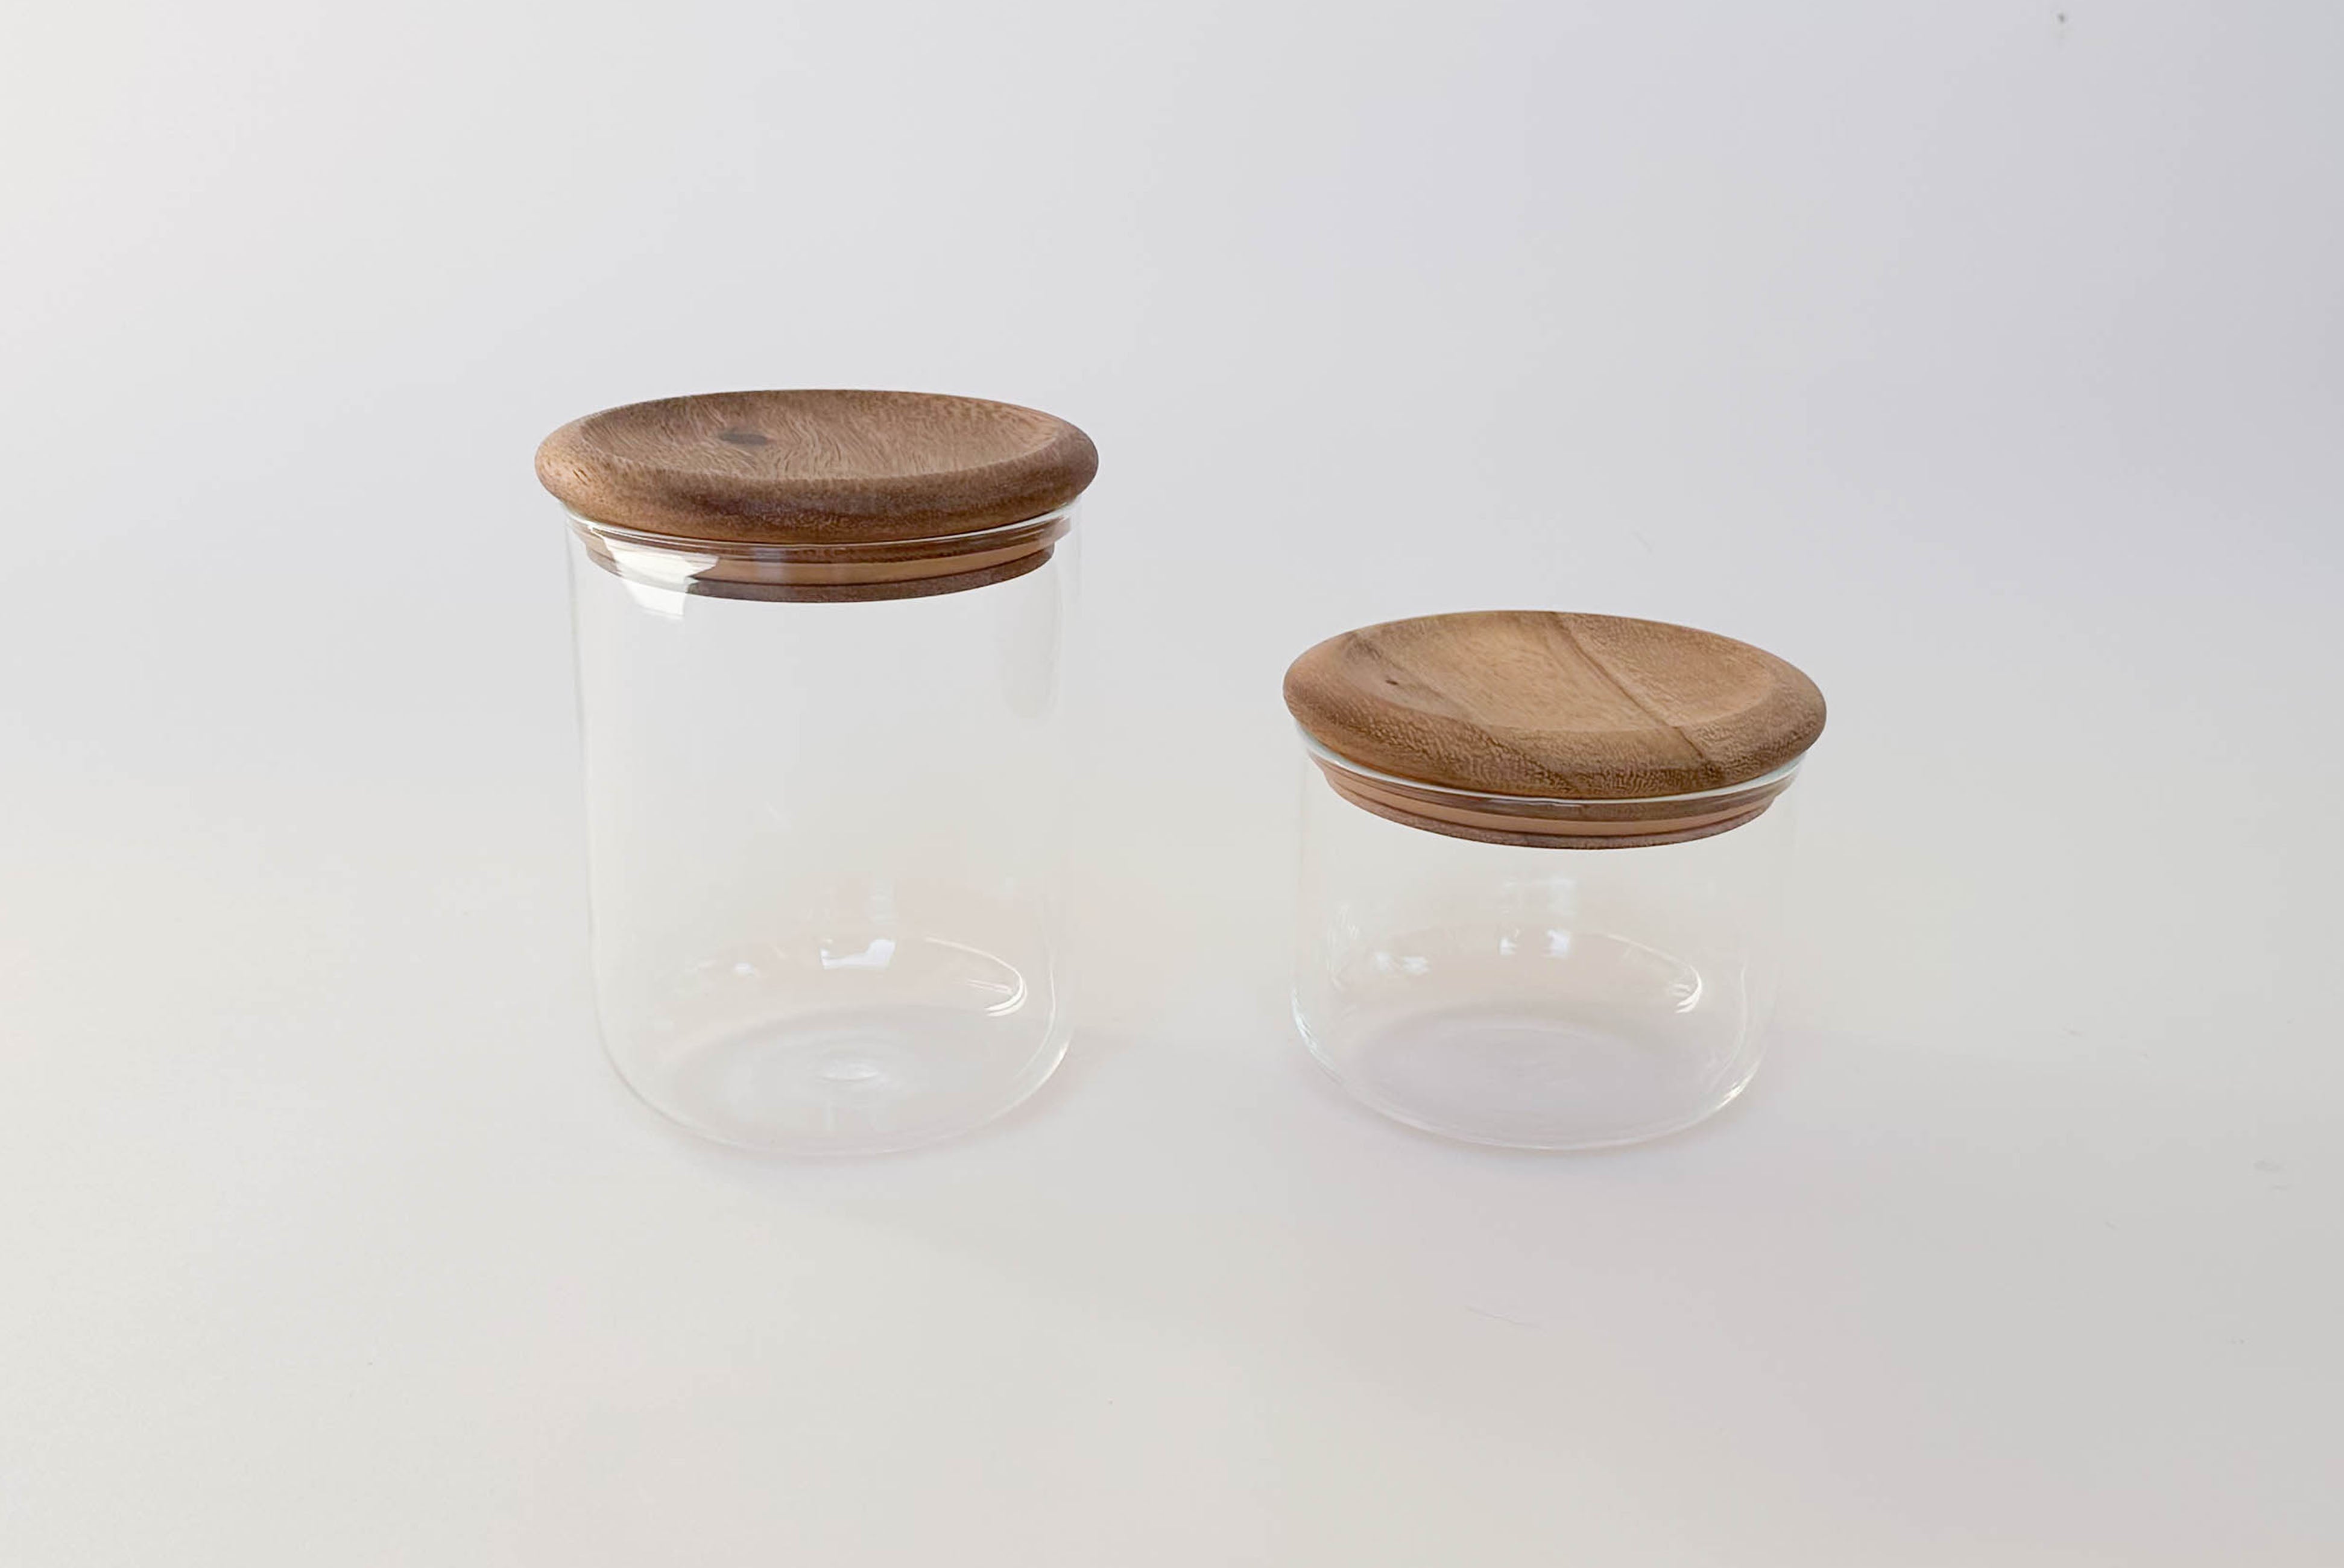 Baum Glass & Wood Airtight Canisters (Set of 2)